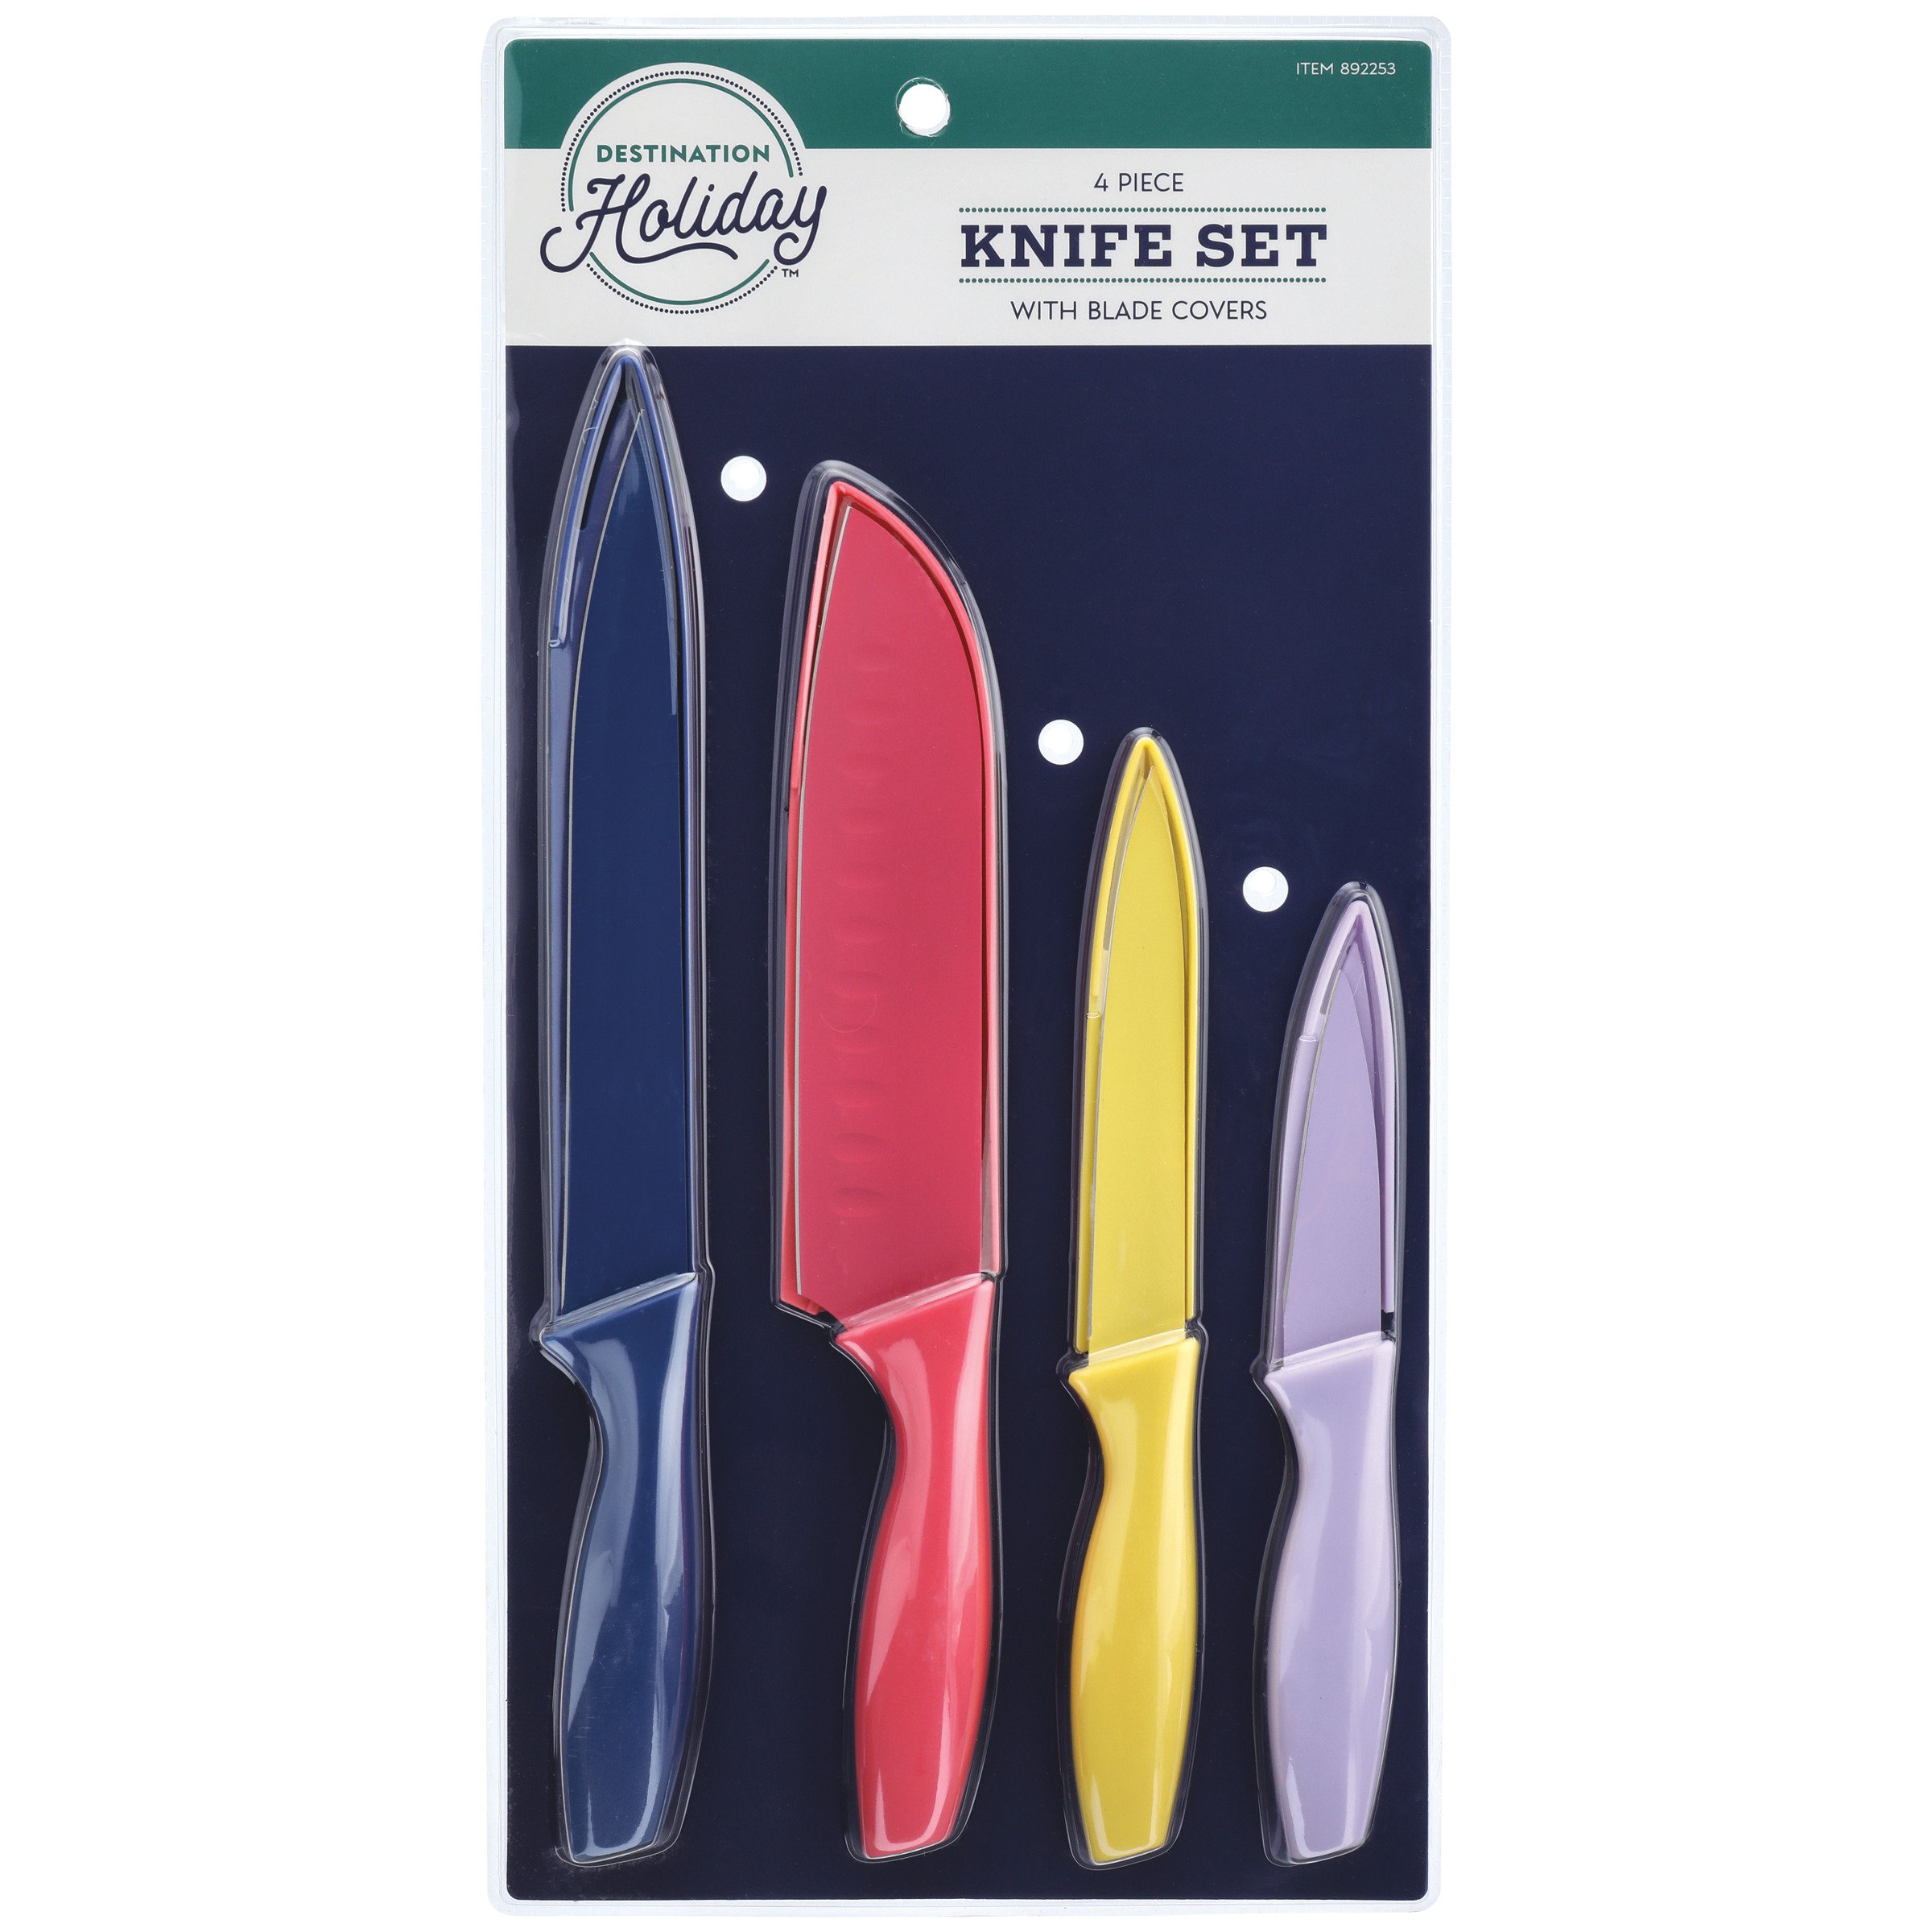 Destination Holiday Knife Set with Covers - Shop Knife Sets at H-E-B